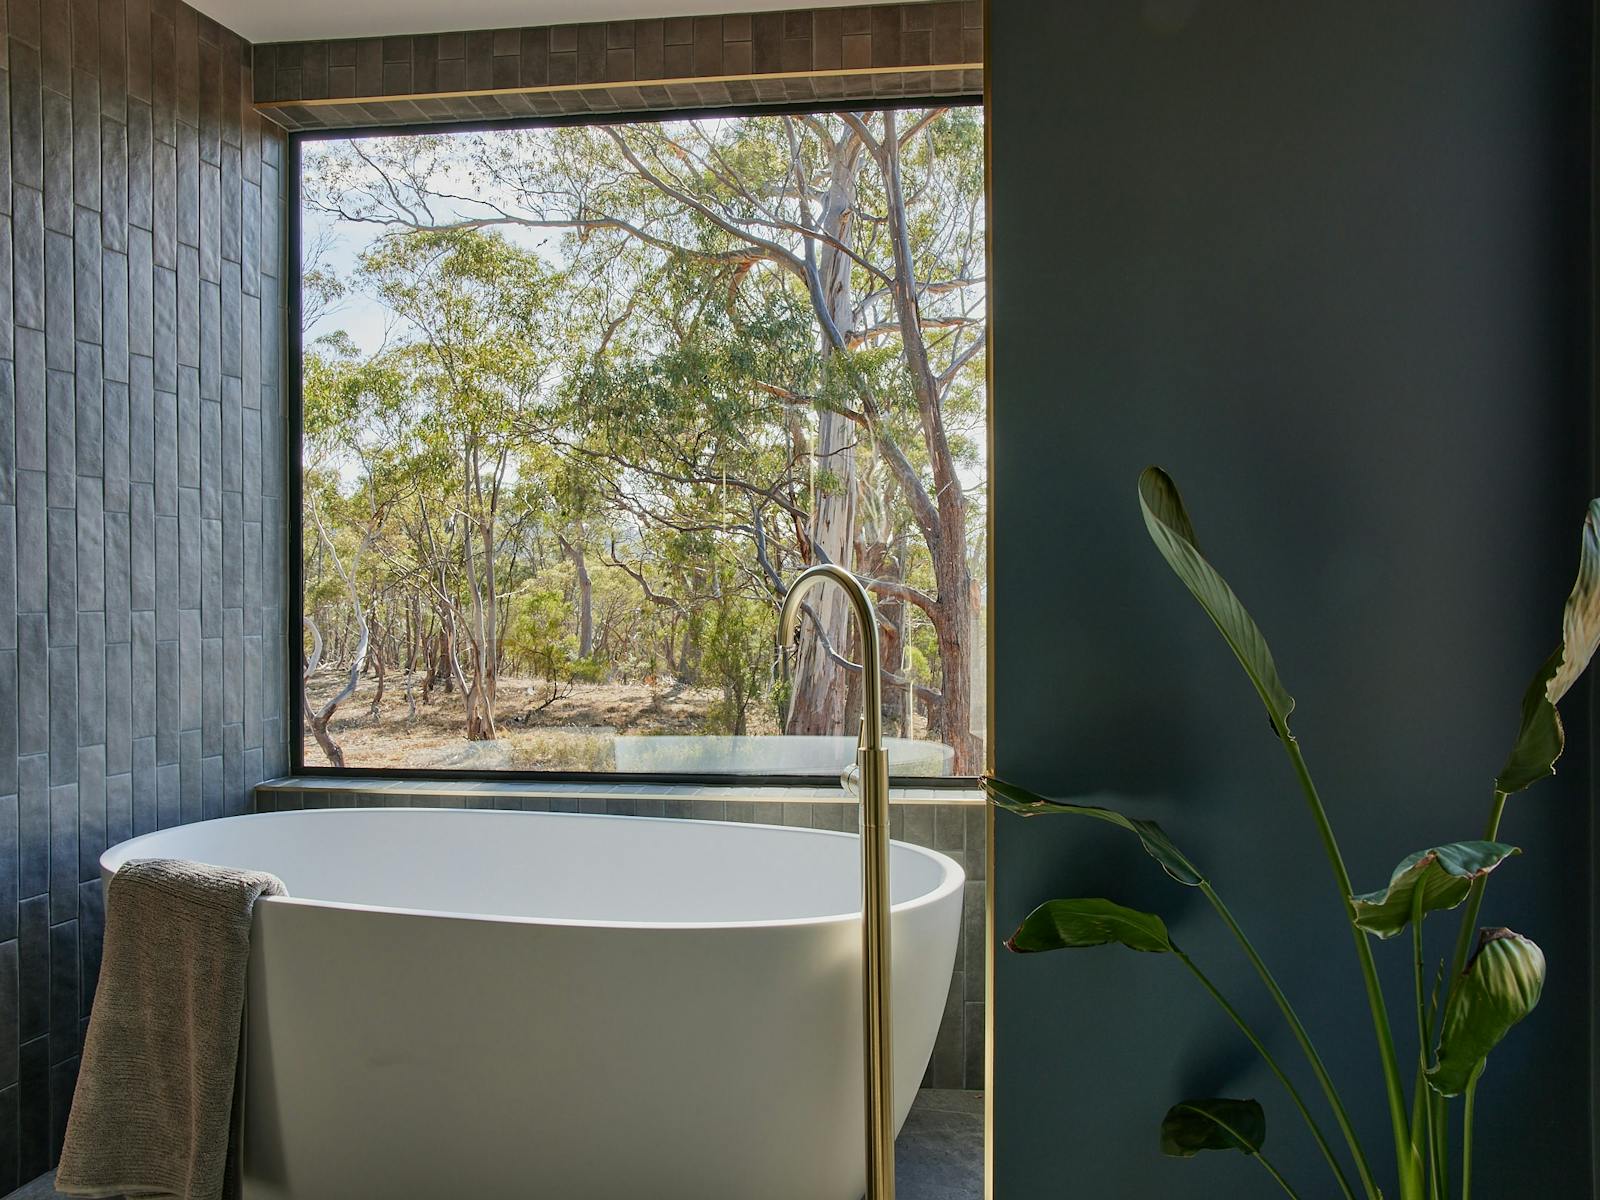 Bath in bathroom with large glass window and bush outlook